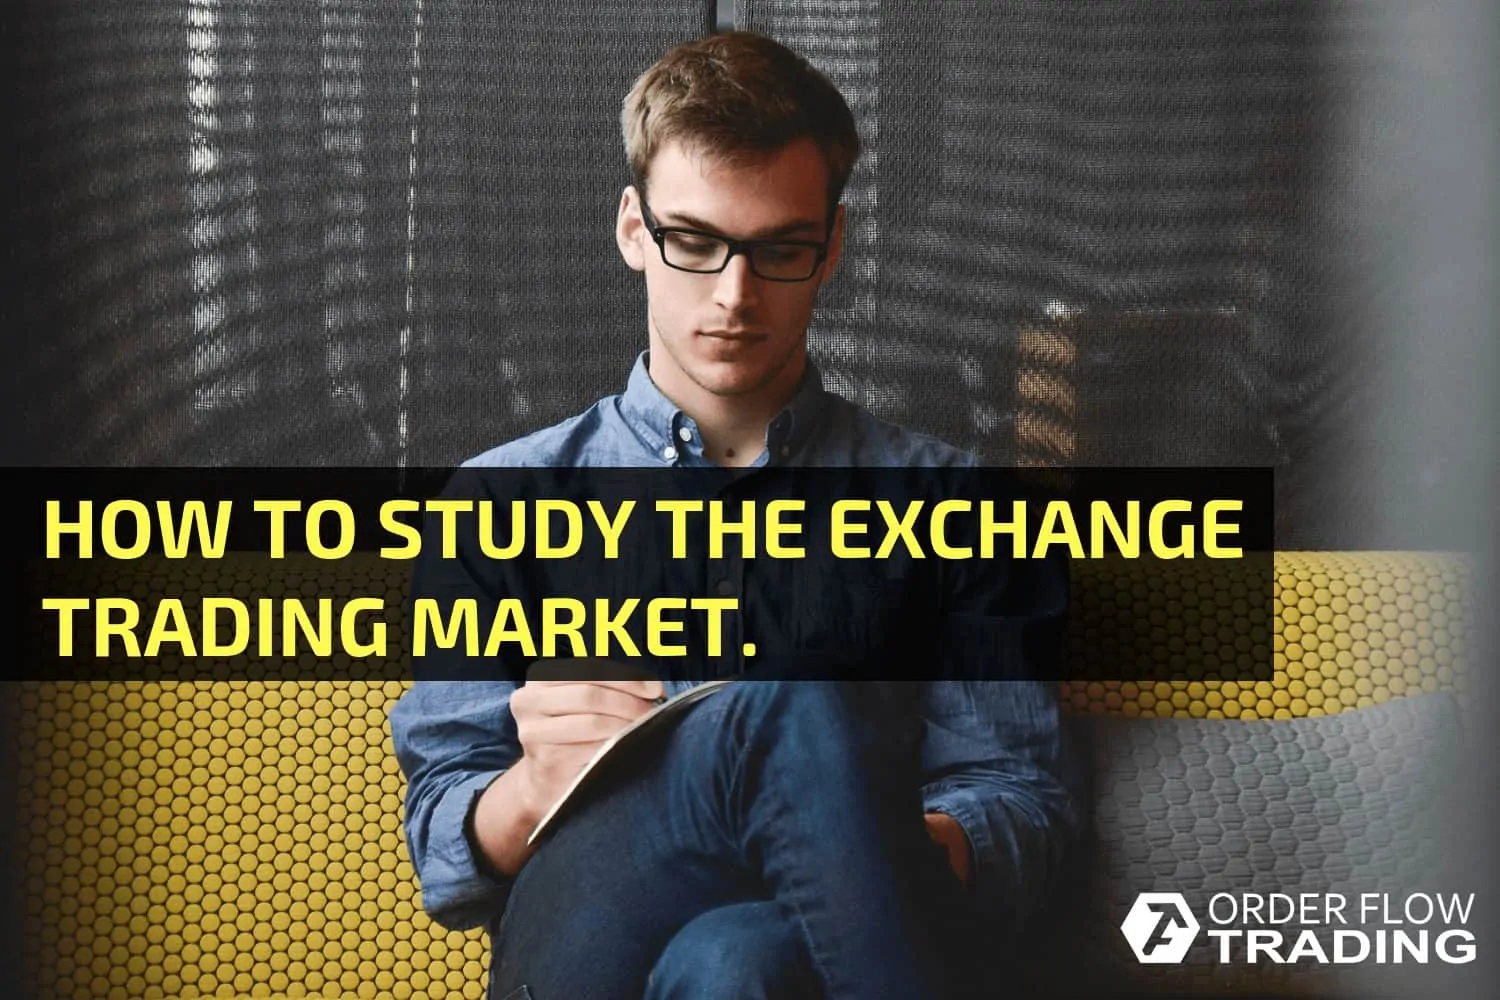 HOW TO STUDY THE EXCHANGE TRADING MARKET.